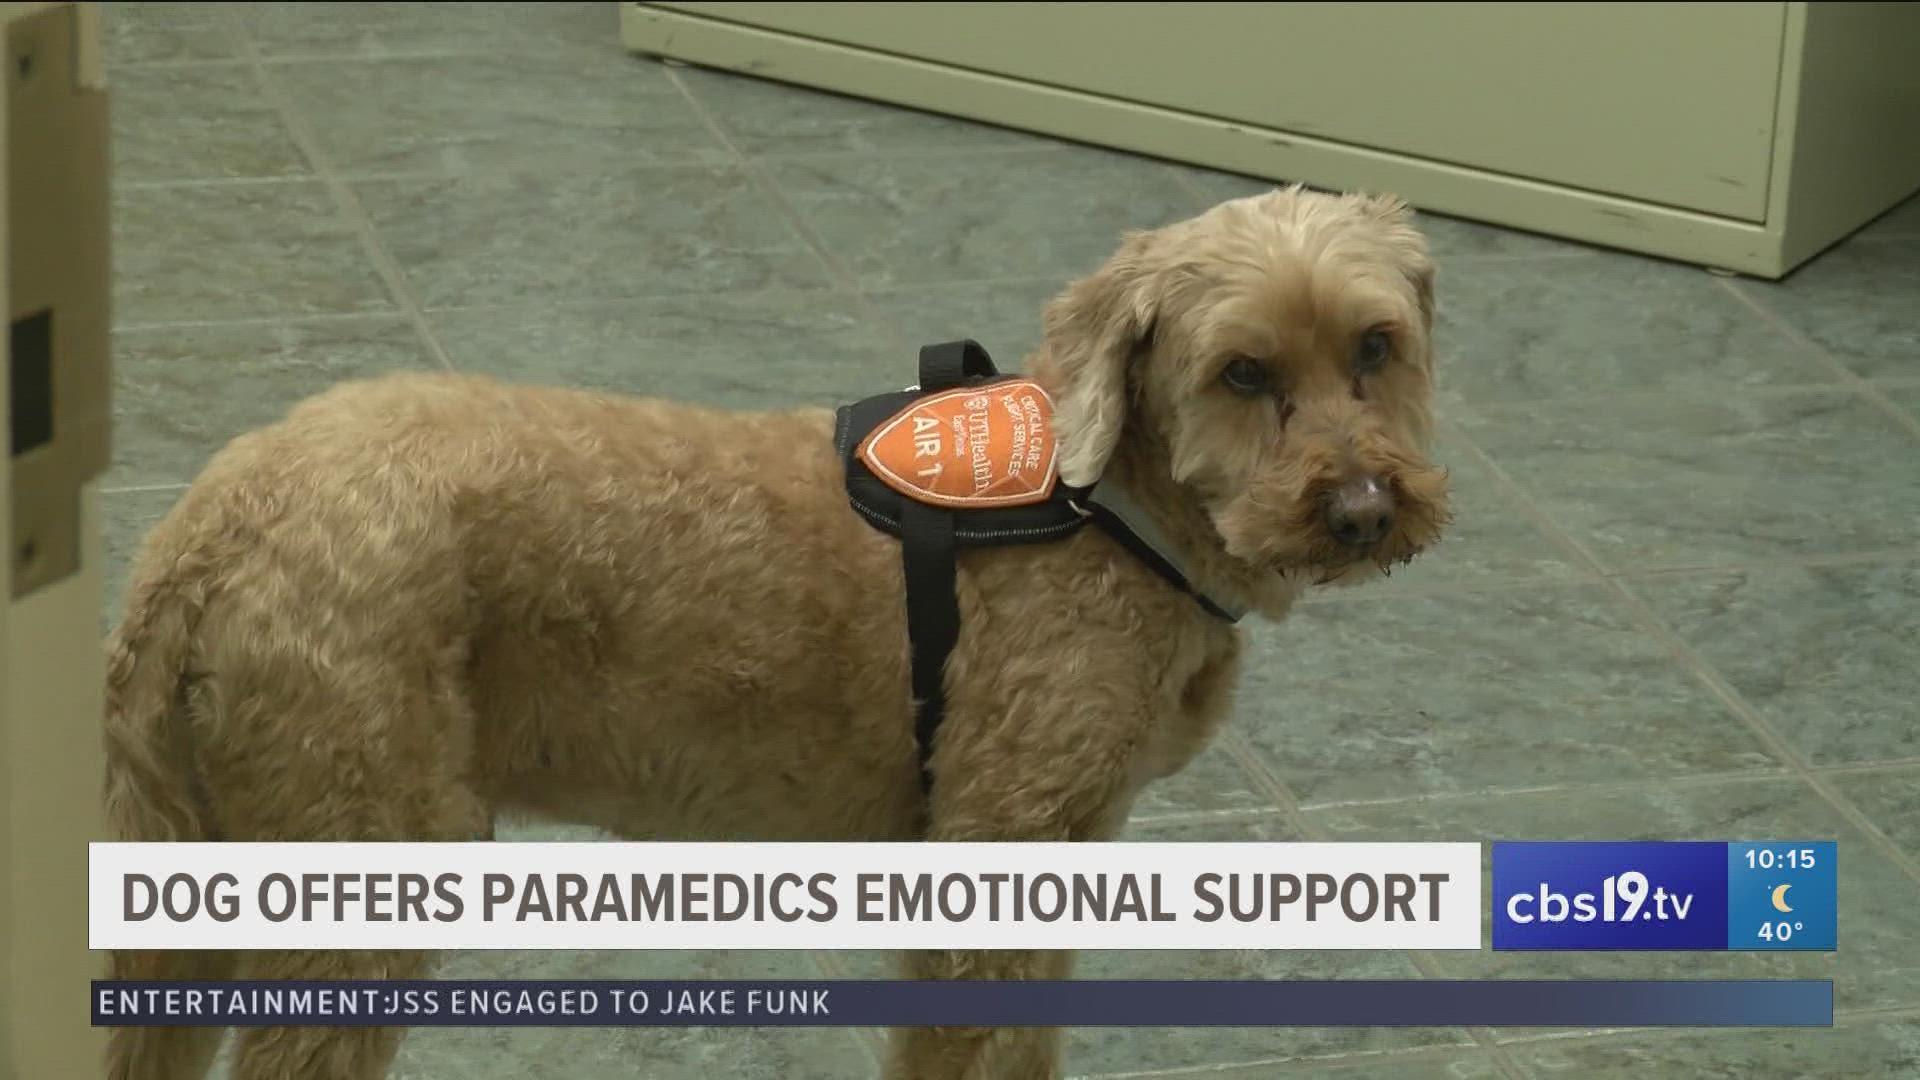 Apollo is a labradoodle support dog that brings a smile to many at UT Health, especially to the EMS crews who experience trauma on the job.